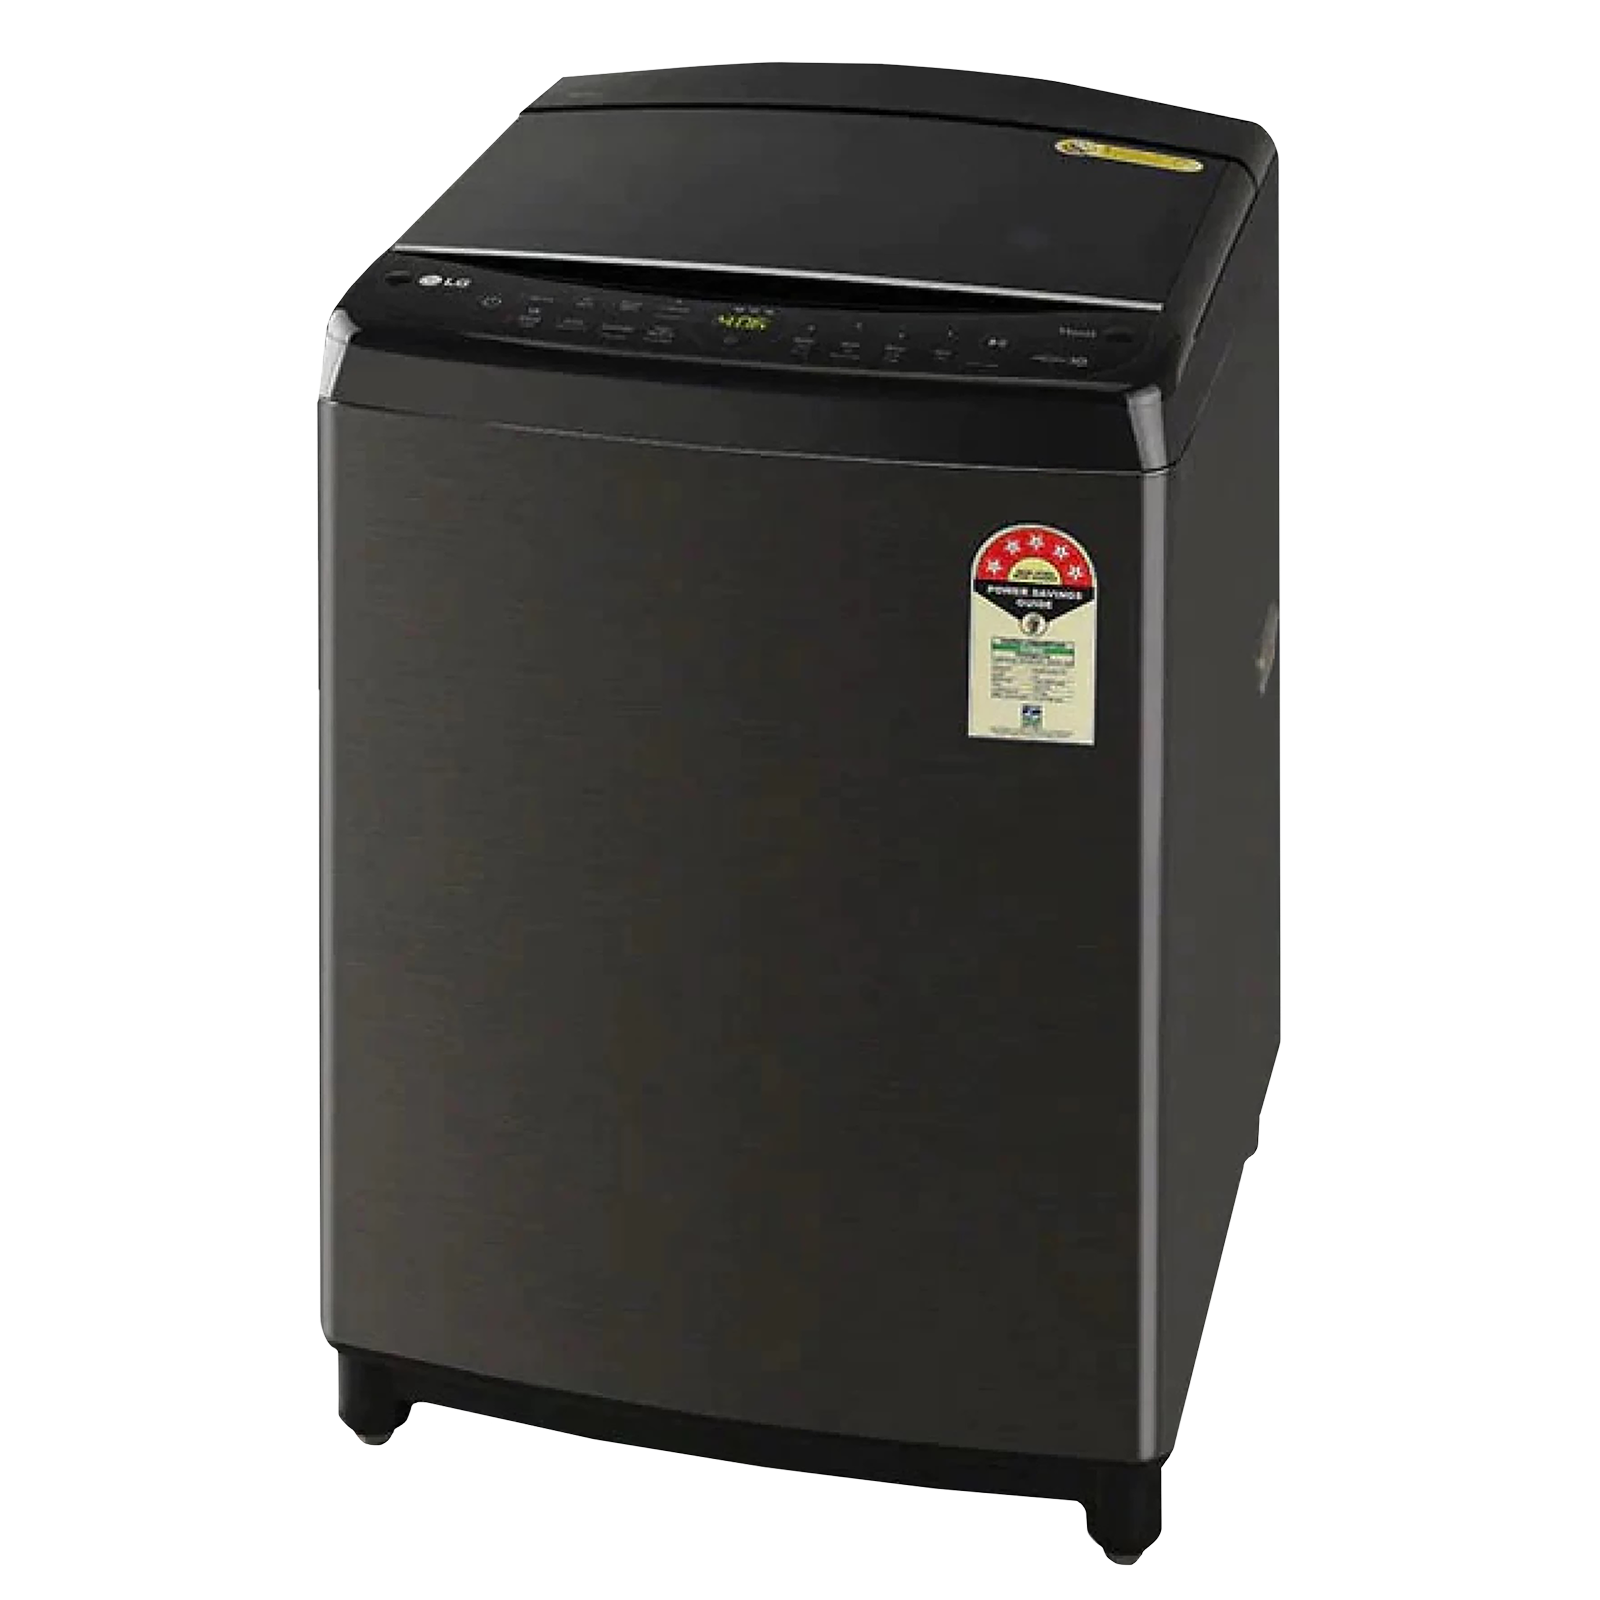 Buy LG 10 kg 5 Star Inverter Fully Automatic Top Load Washing Machine  (THD10SWP.APBQEIL, In-Built Heater, Platinum Black) Online - Croma